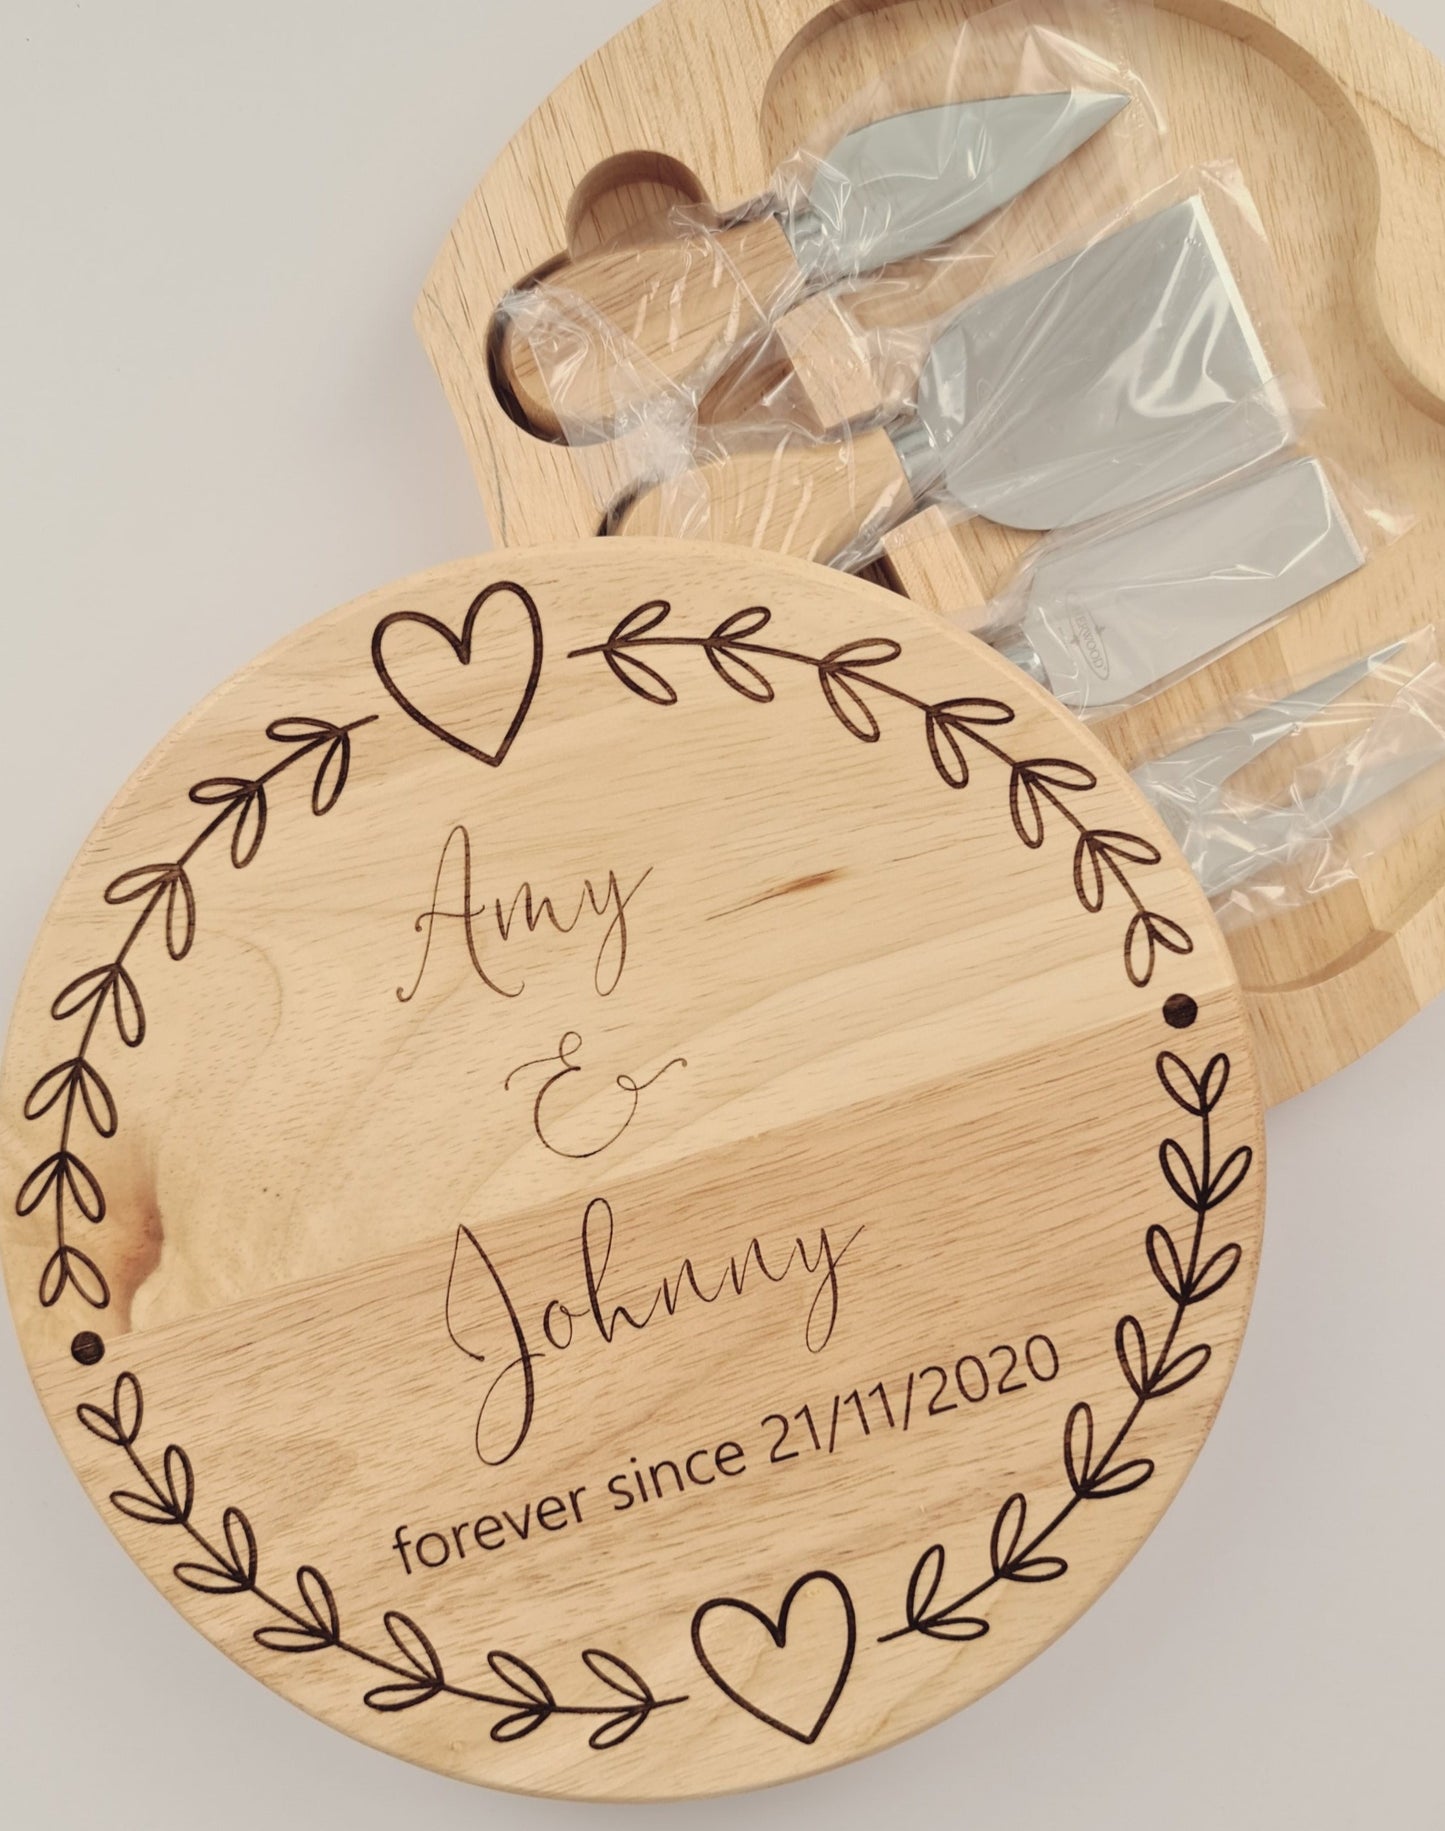 Engraved Cheese Board Set